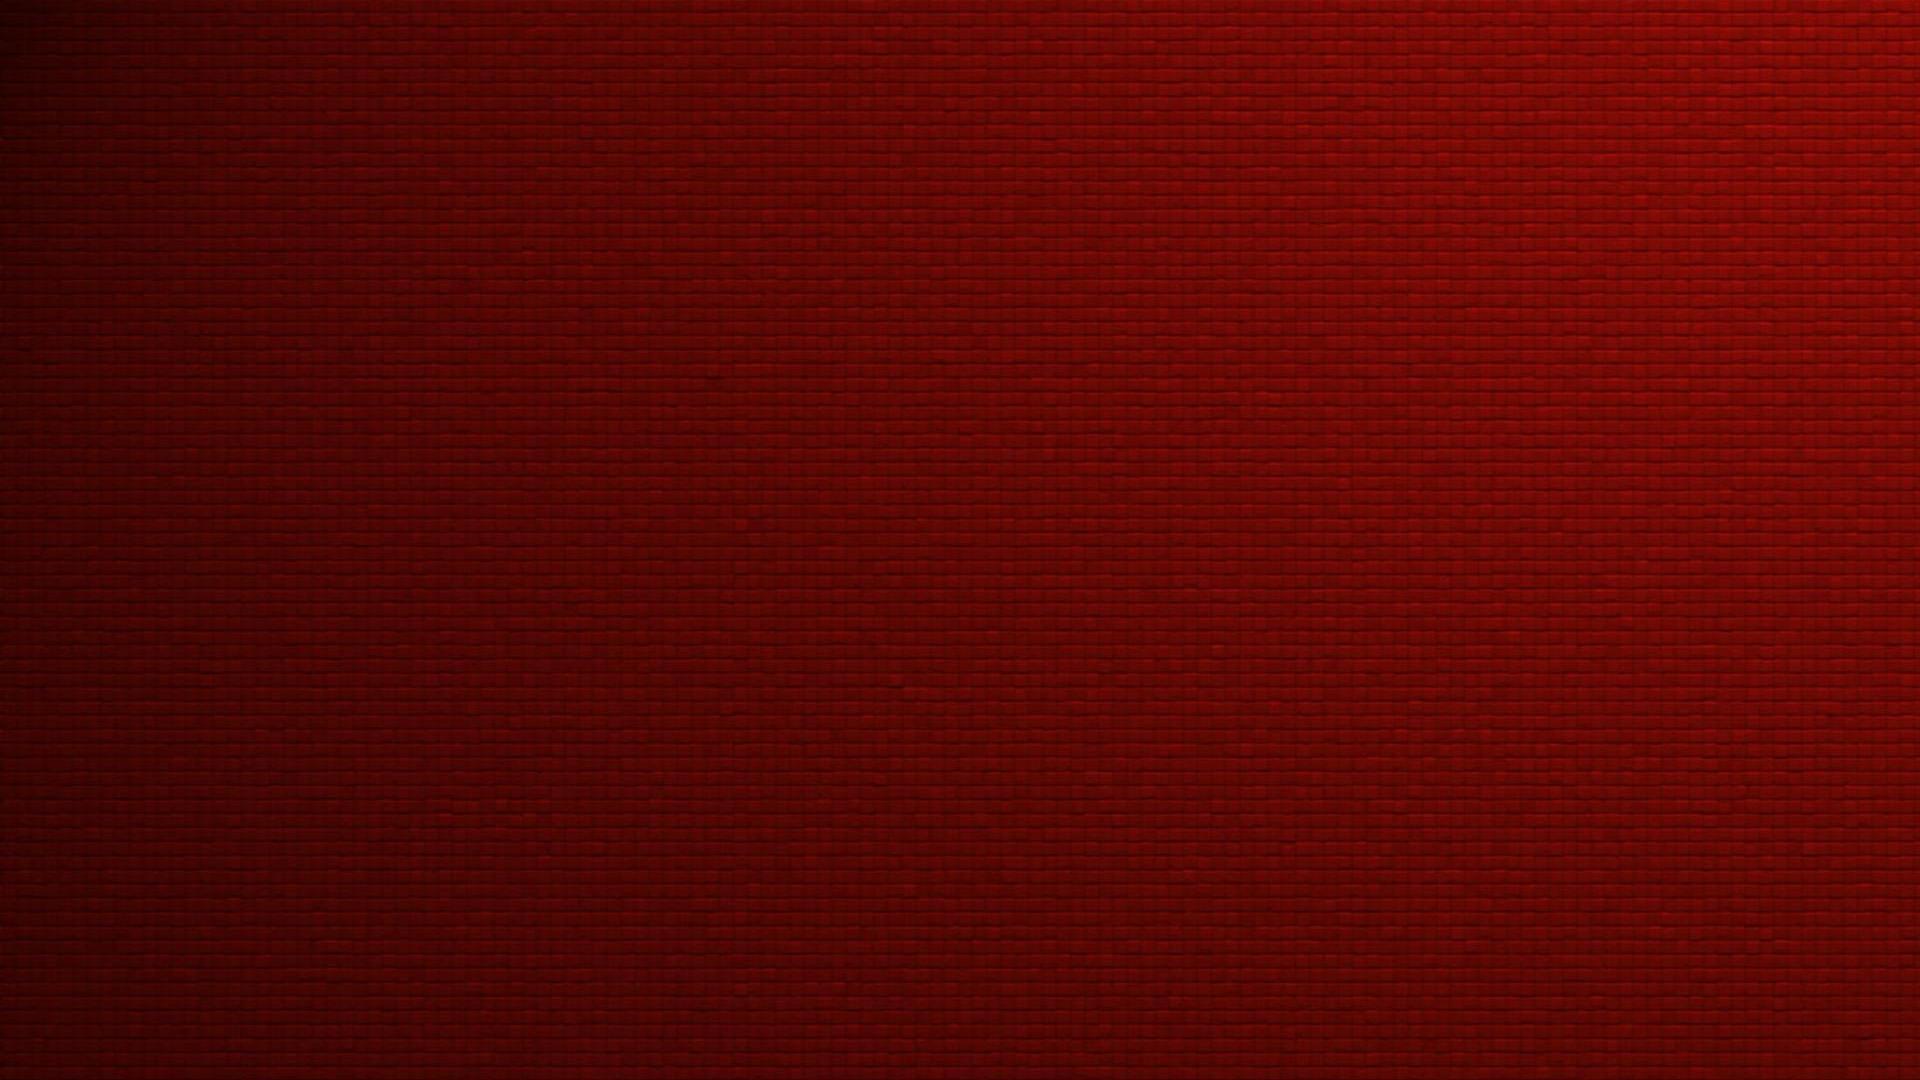 Plain Red Background Wallpaper Background Wallpaper Red Background Image  And Wallpaper for Free Download